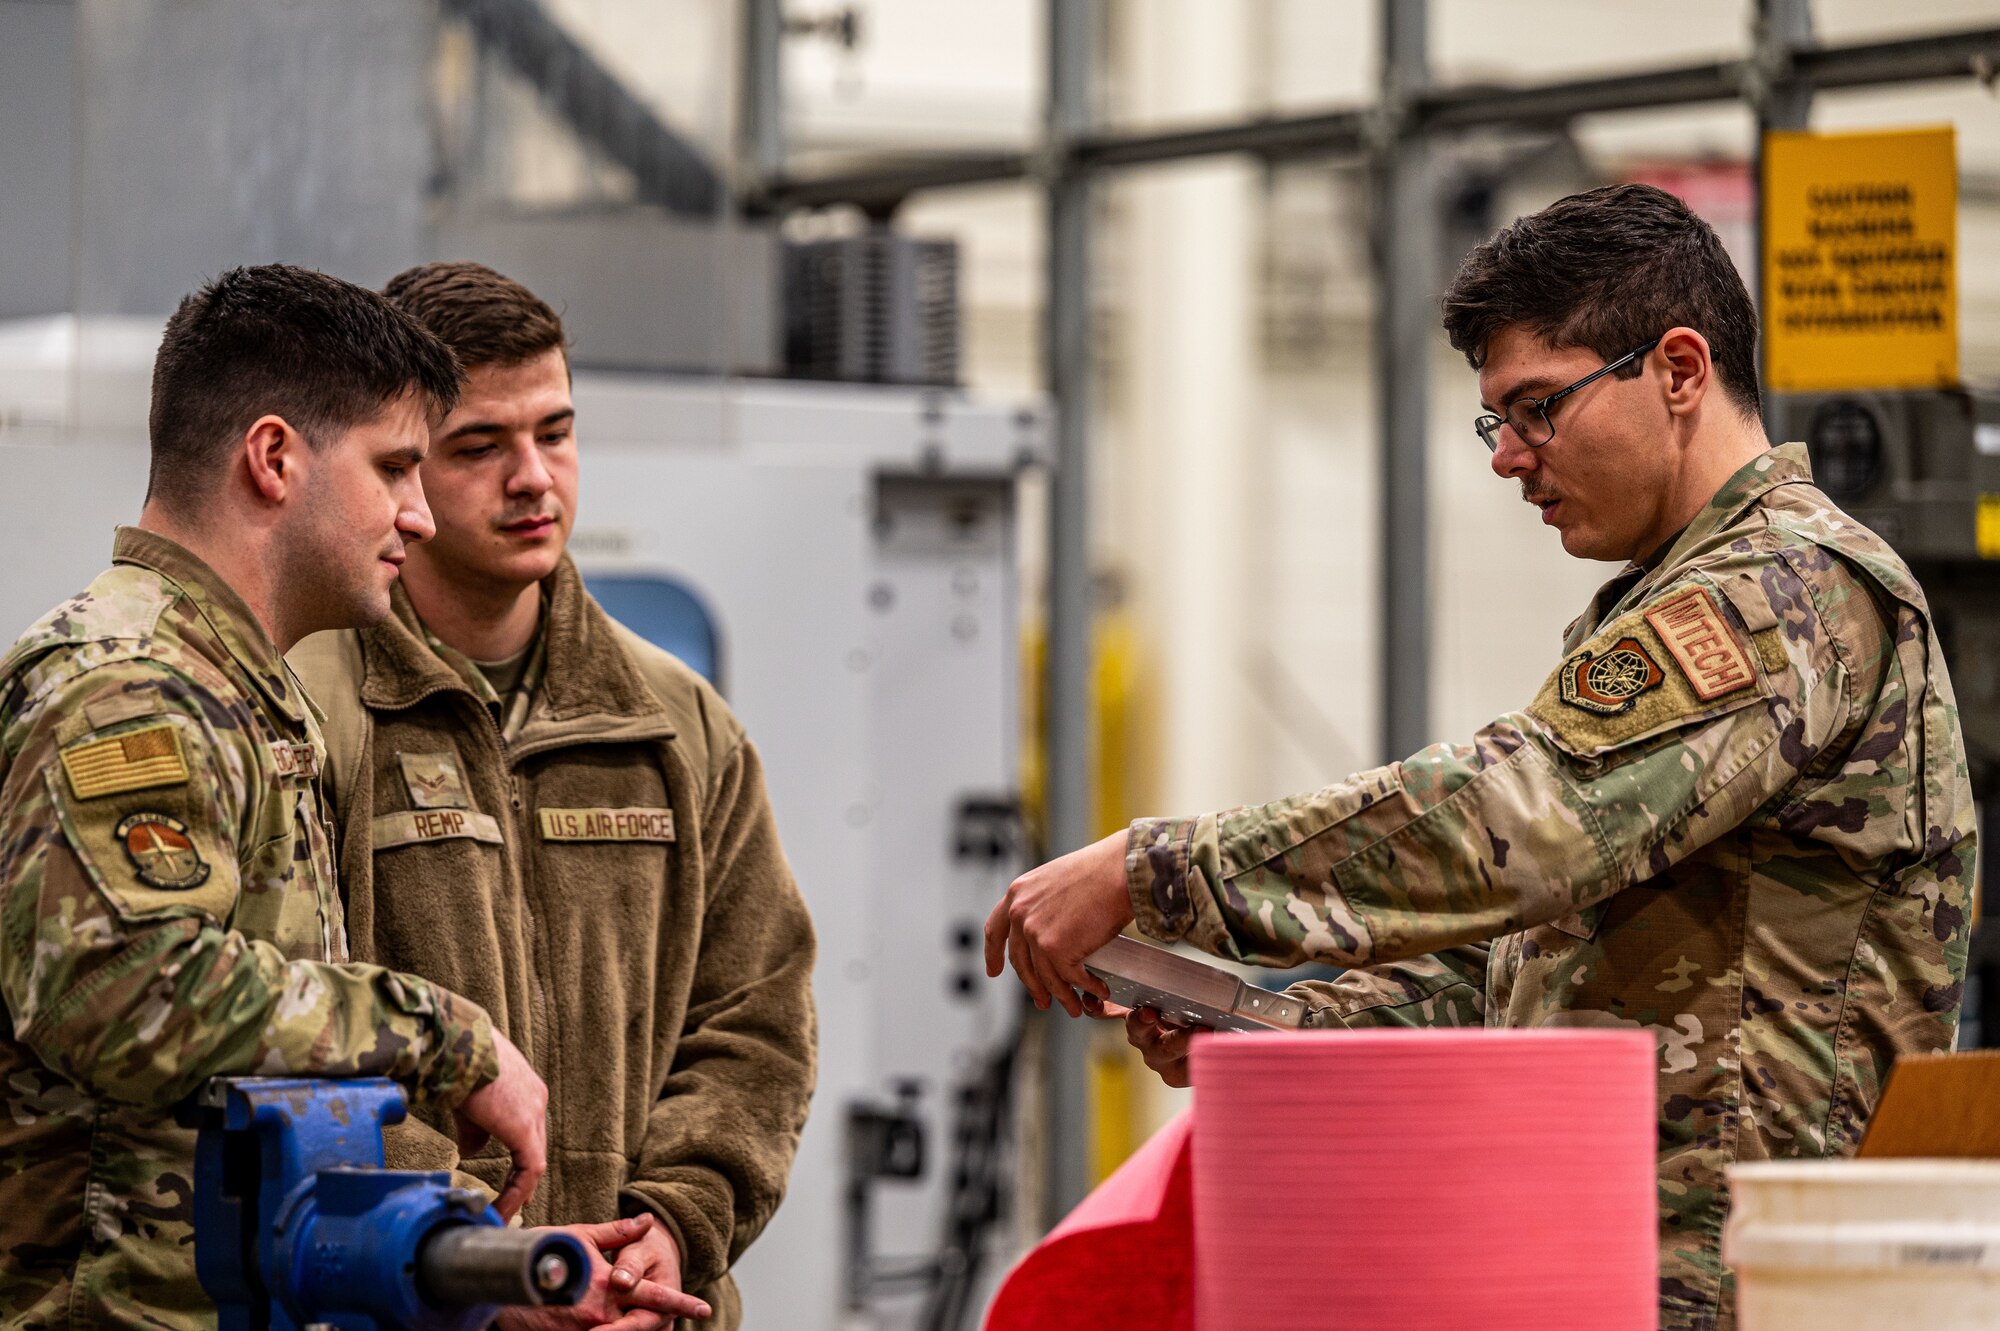 U.S. Air Force Airmen assigned to the 305th Maintenance Squadron discuss aircraft repair plans at Joint Base McGuire-Dix-Lakehurst, N.J., Feb. 15, 2024. Maintainers from the 305th MXS completed a five-month fabrication project for a damaged C-17 Globemaster III, reaffirming Air Mobility Command’s strategic advance and rapid global mobility. (U.S. Air Force photo by 2nd Lt. Alexis Kula)